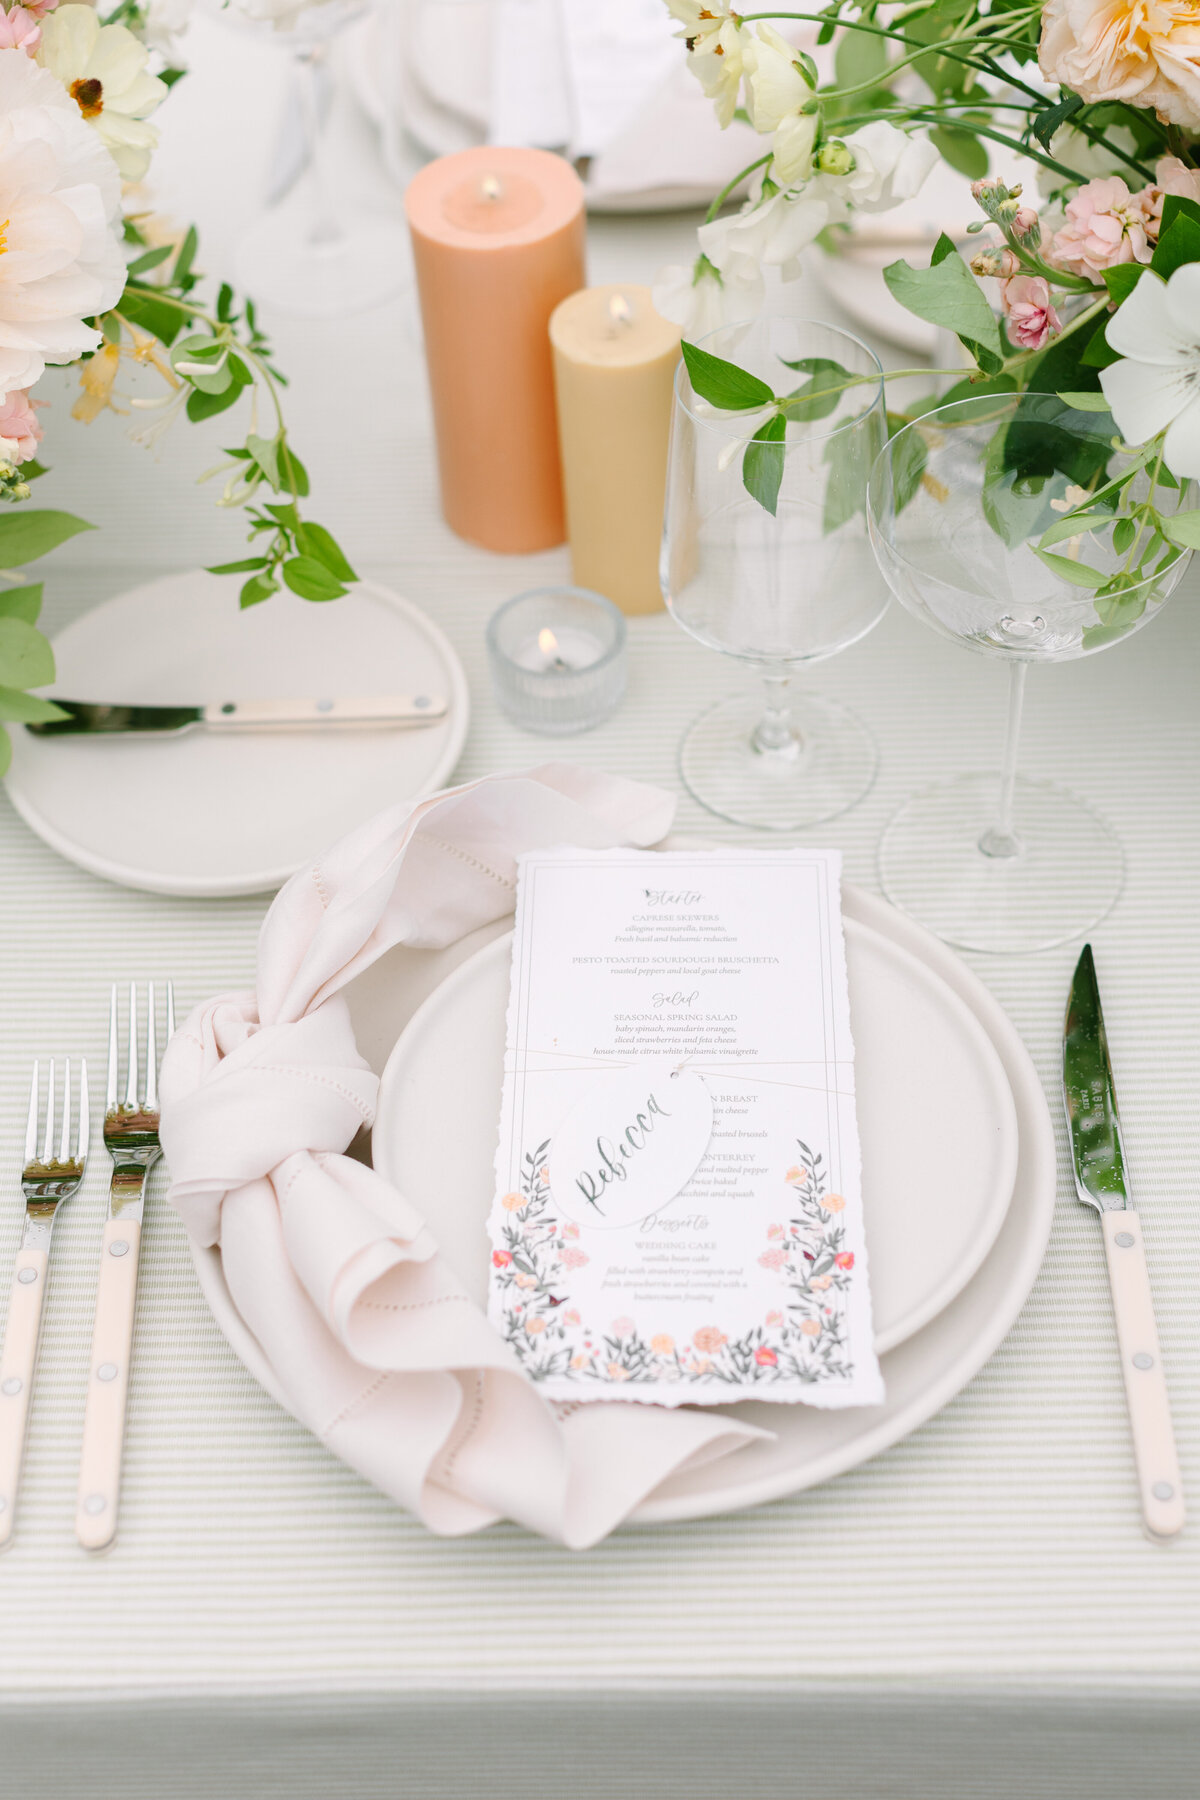 sonoma wedding reception tablescape with dinner menu, white place setting, coral candles, and loose florals and greenery.